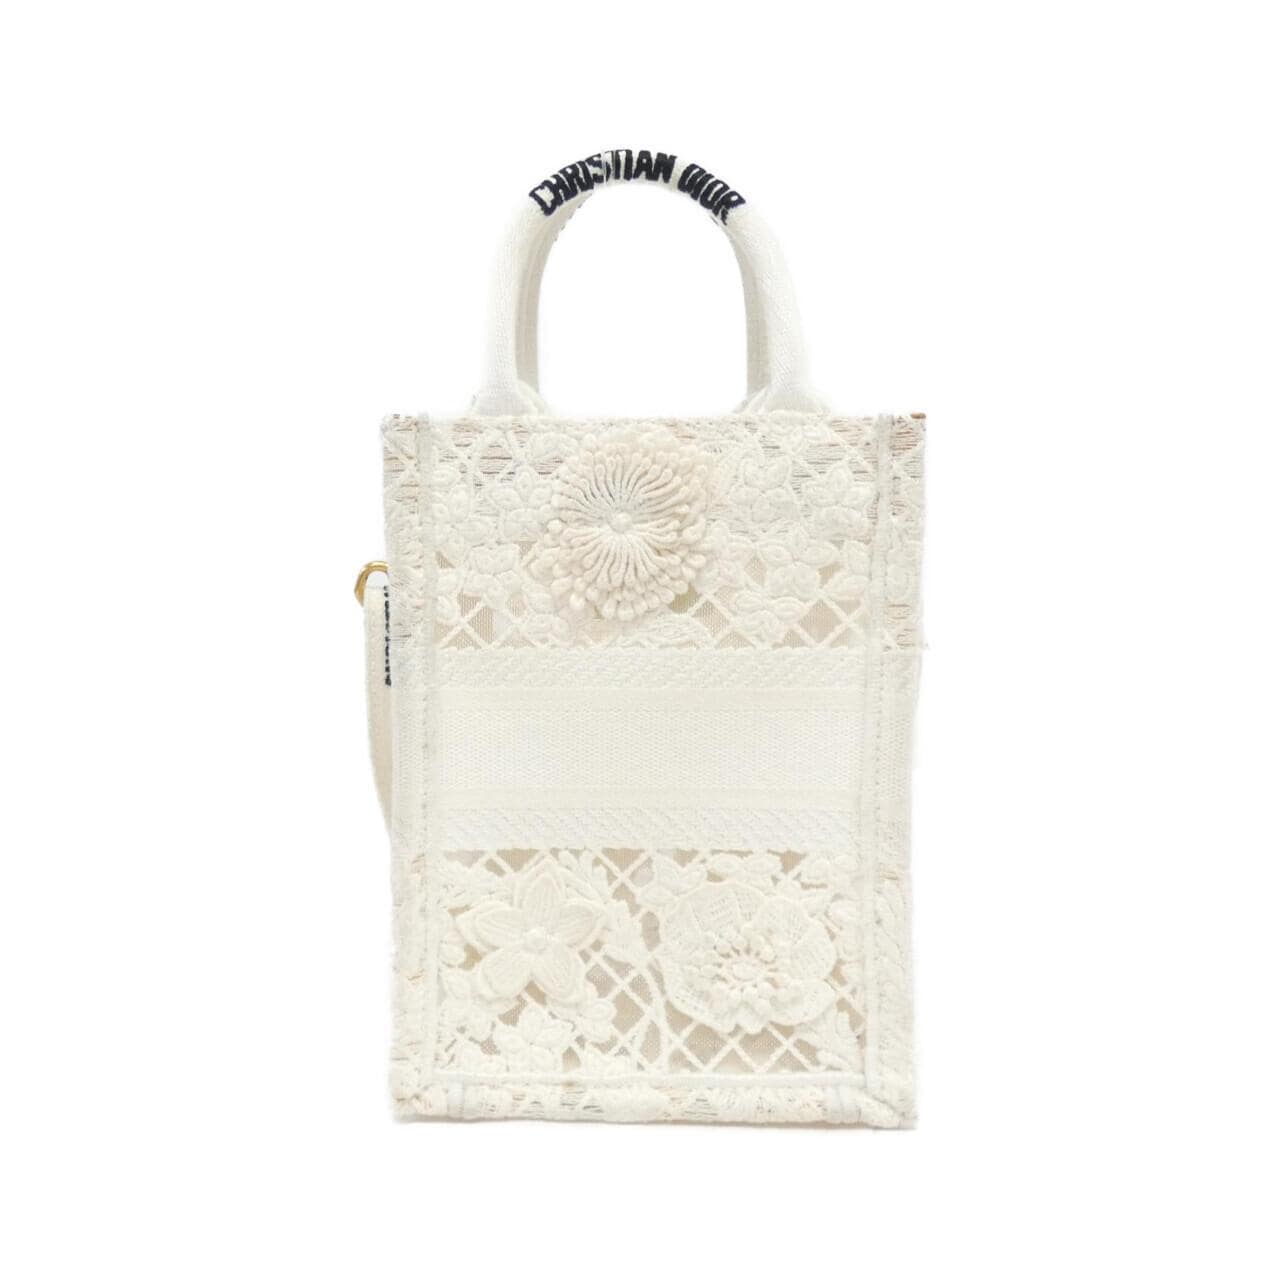 Christian DIOR D-LACE DIOR Book Tote 迷你垂直包 S5555CEAX 包